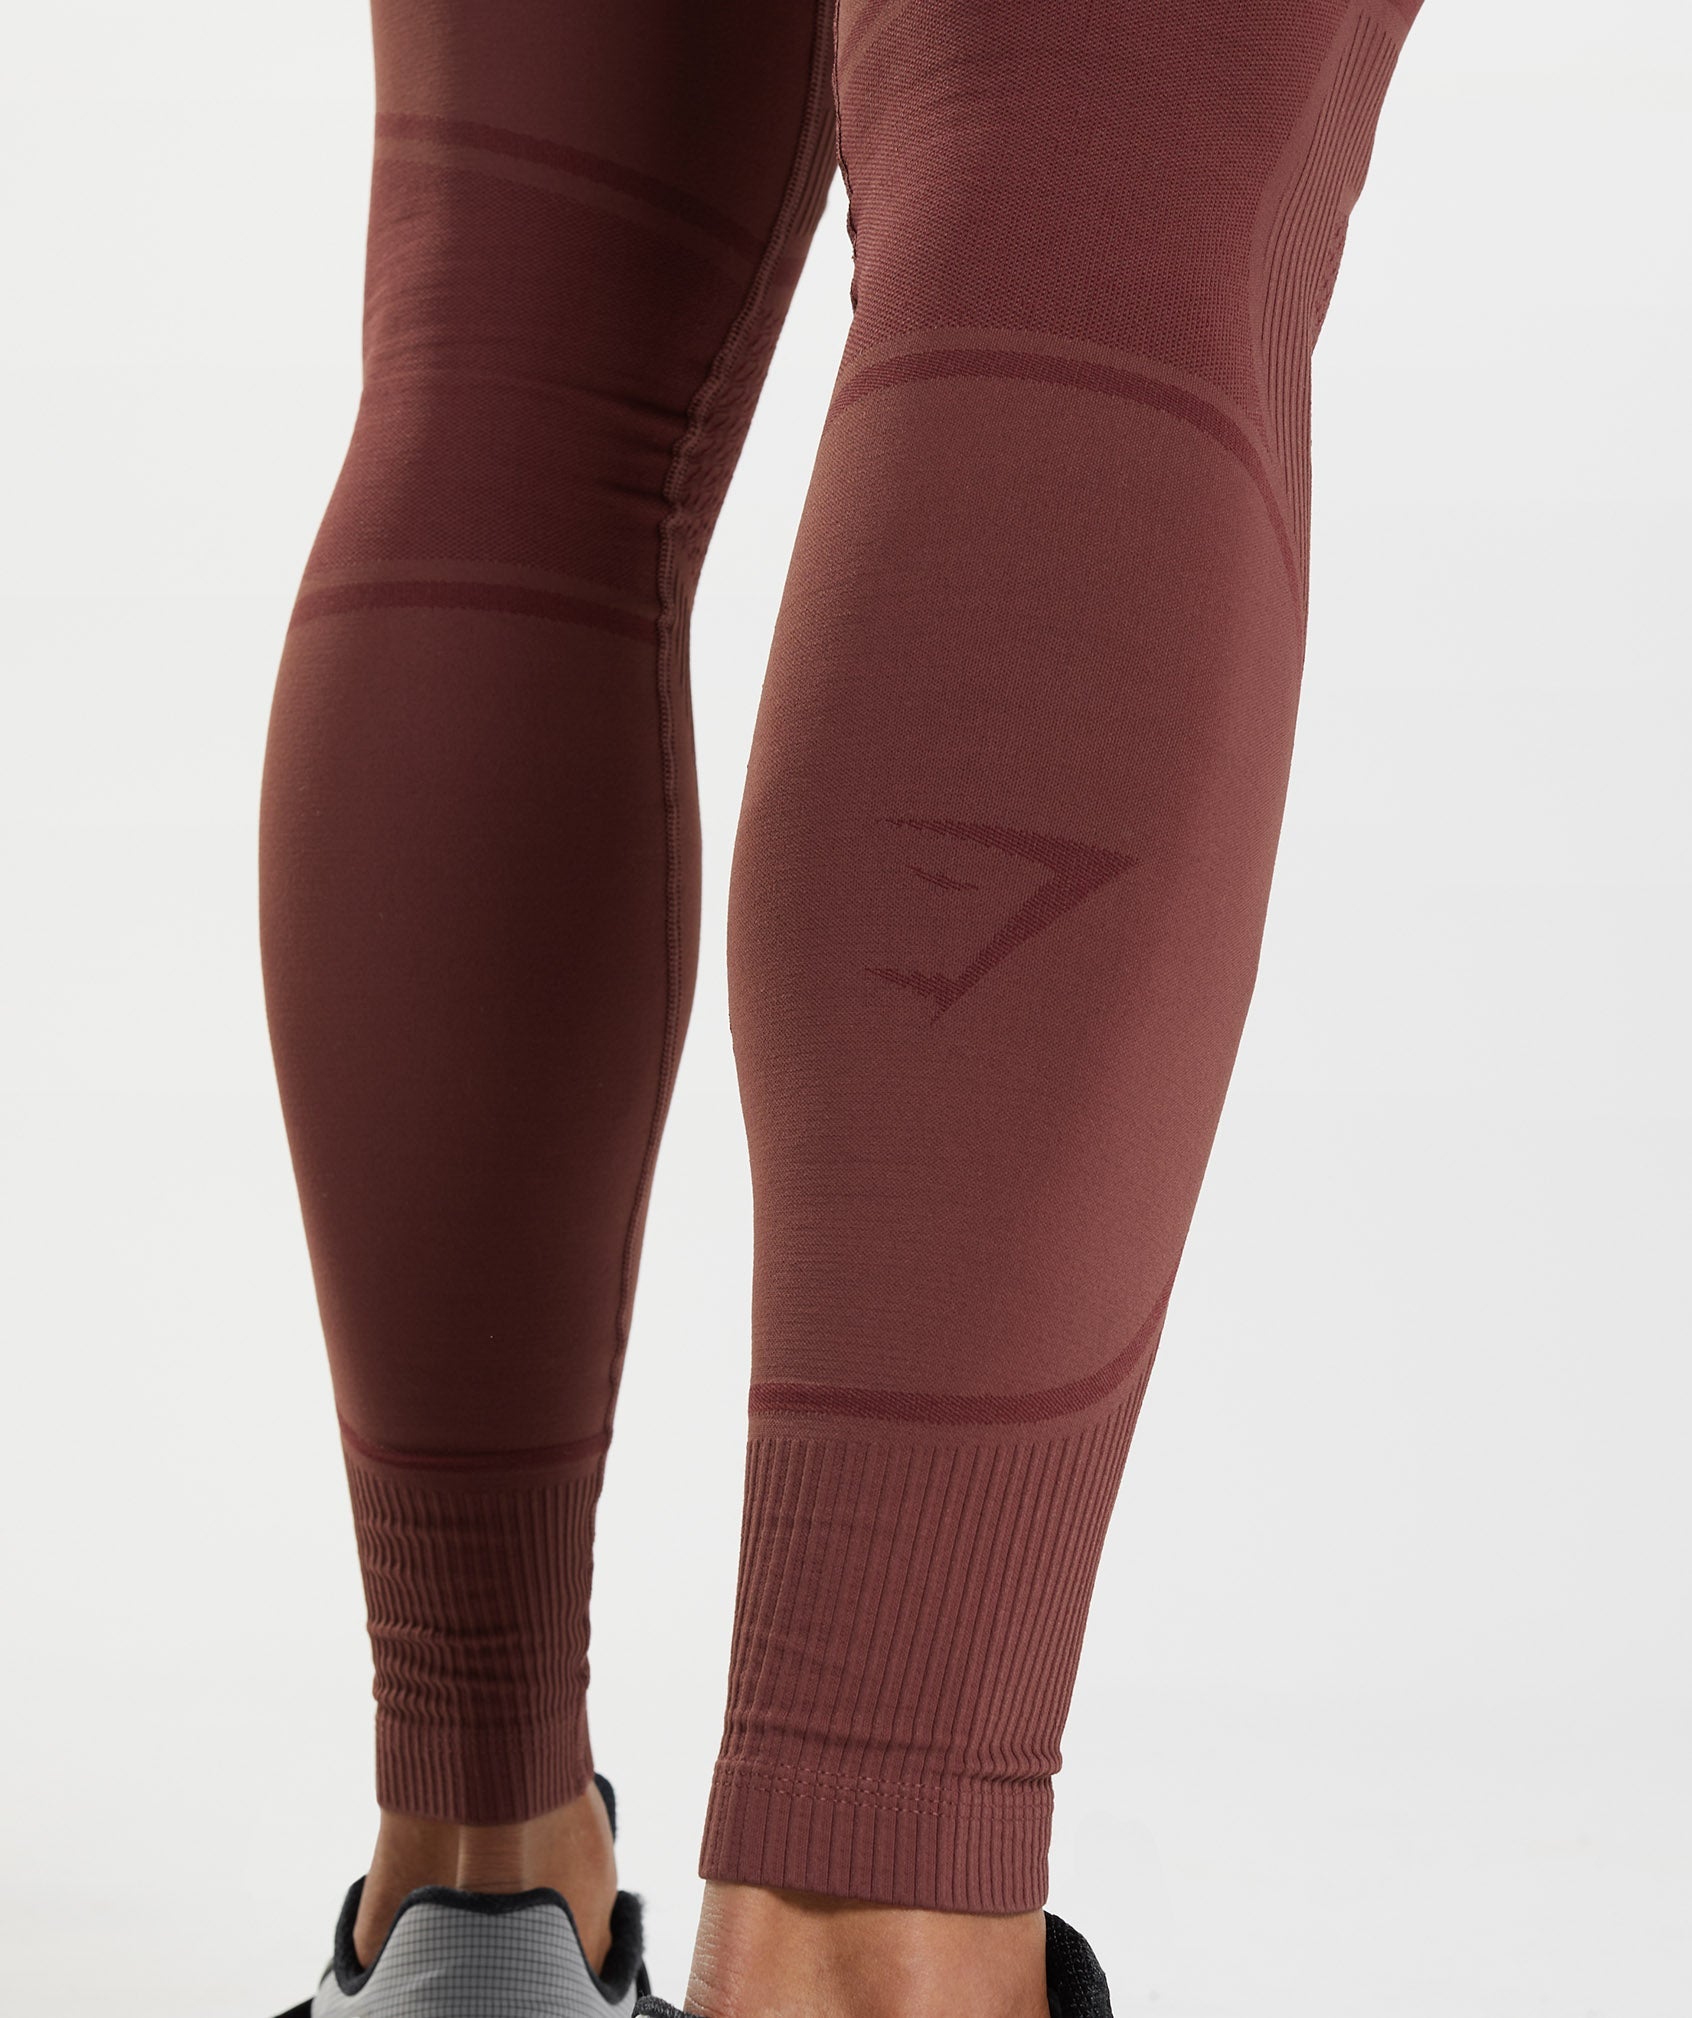 315 Seamless Tights in Cherry Brown/Athletic Maroon - view 6